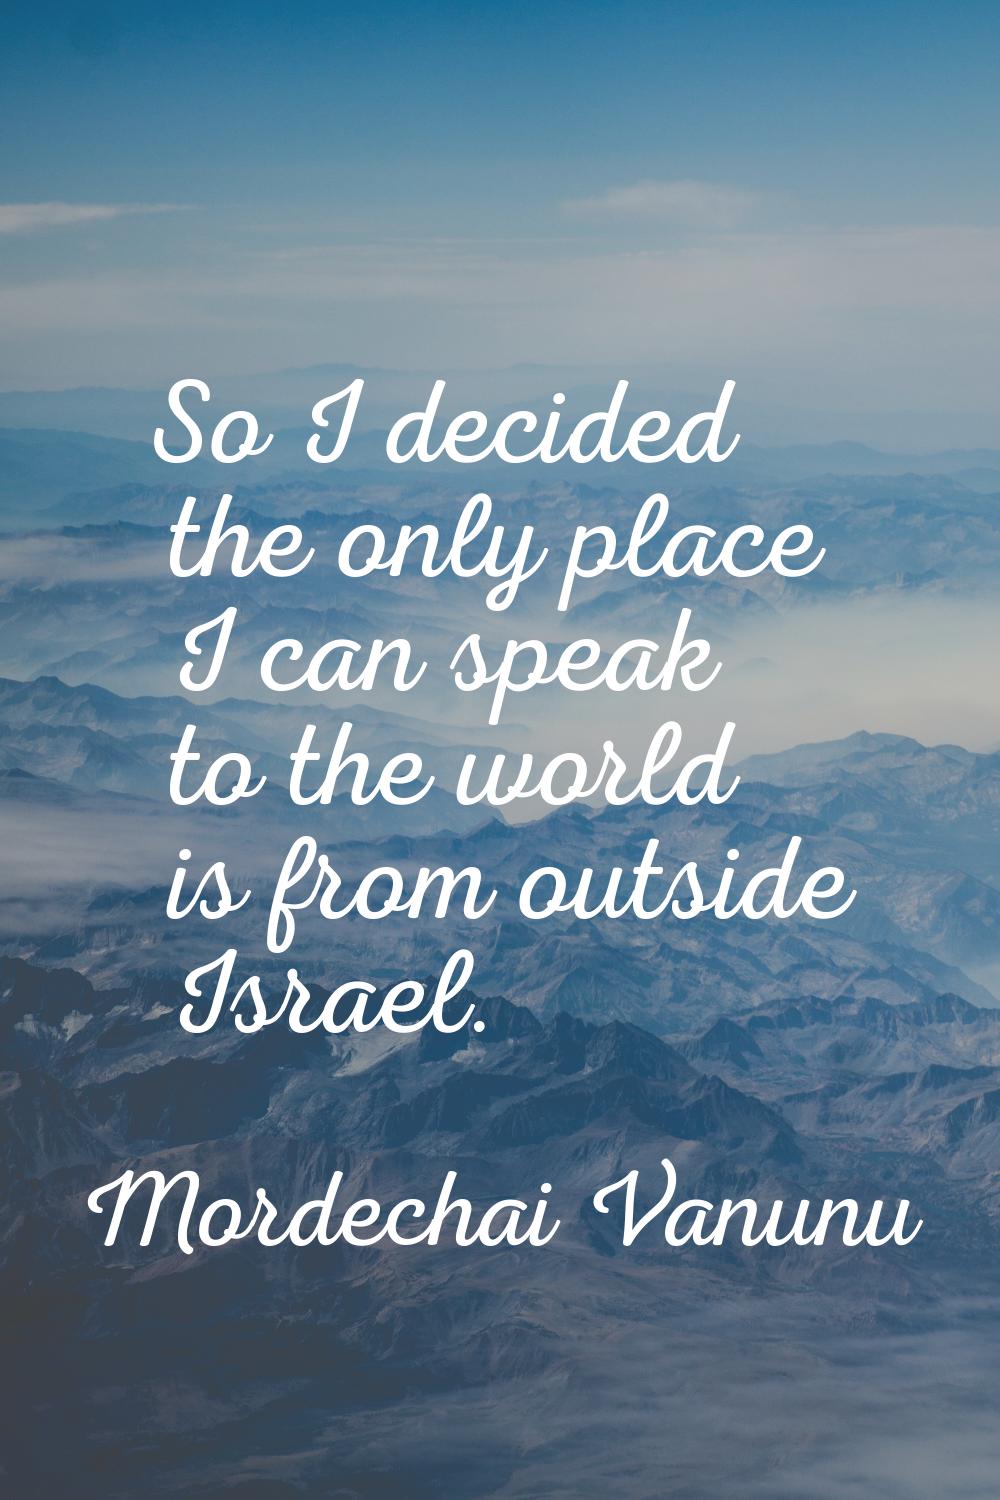 So I decided the only place I can speak to the world is from outside Israel.